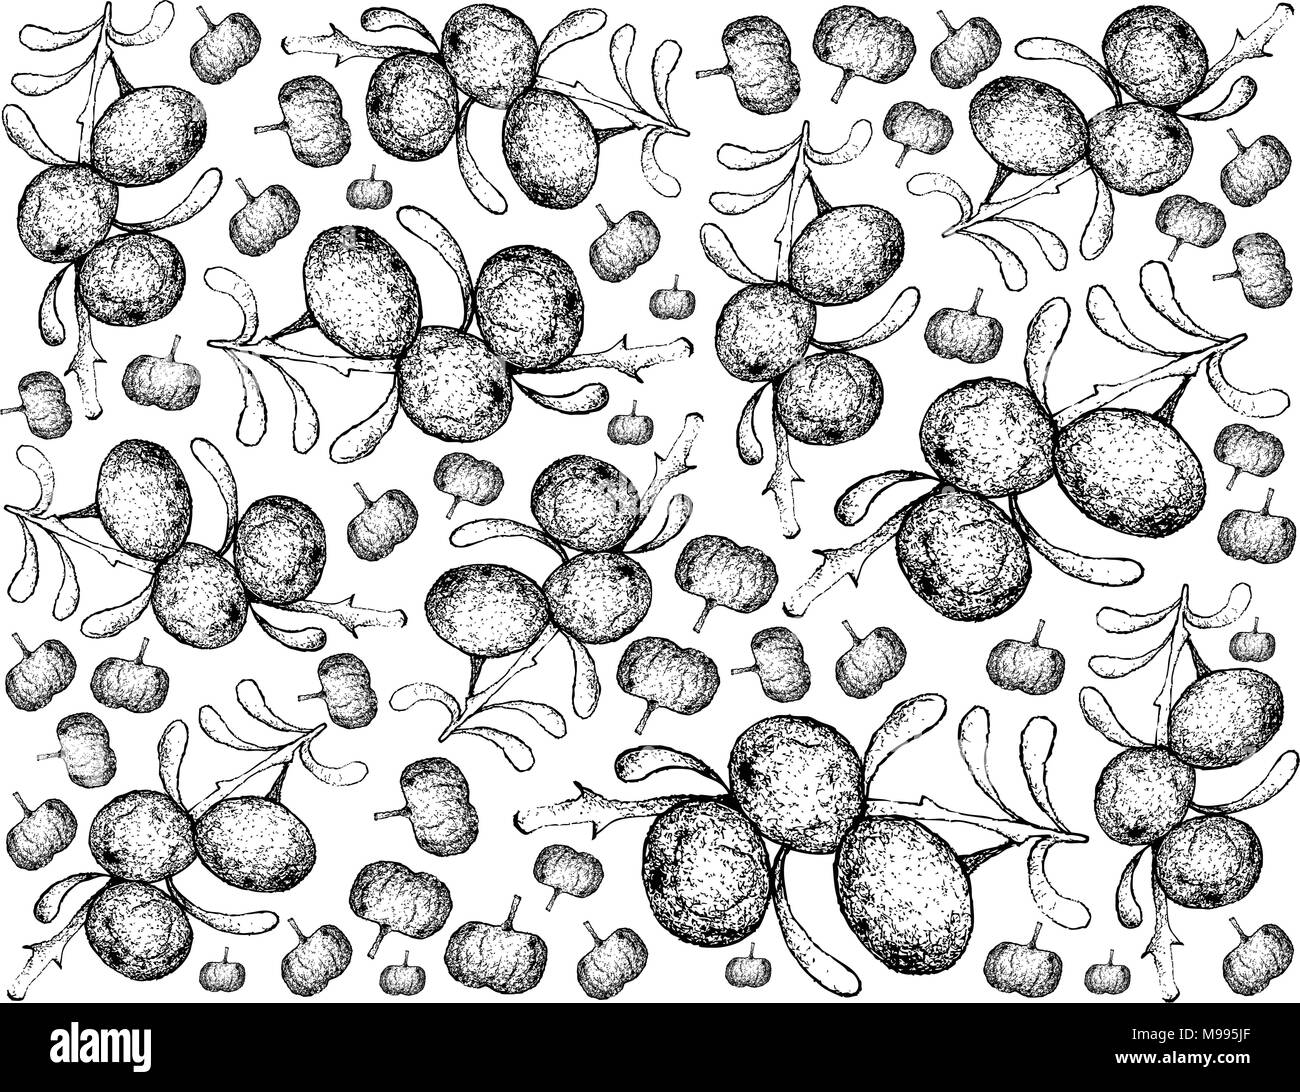 Berry Fruit, Illustration Wallpaper Background of Hand Drawn Sketch of Black Goji or Lycium Ruthenicum Fruits Isolated on White Background. Stock Vector